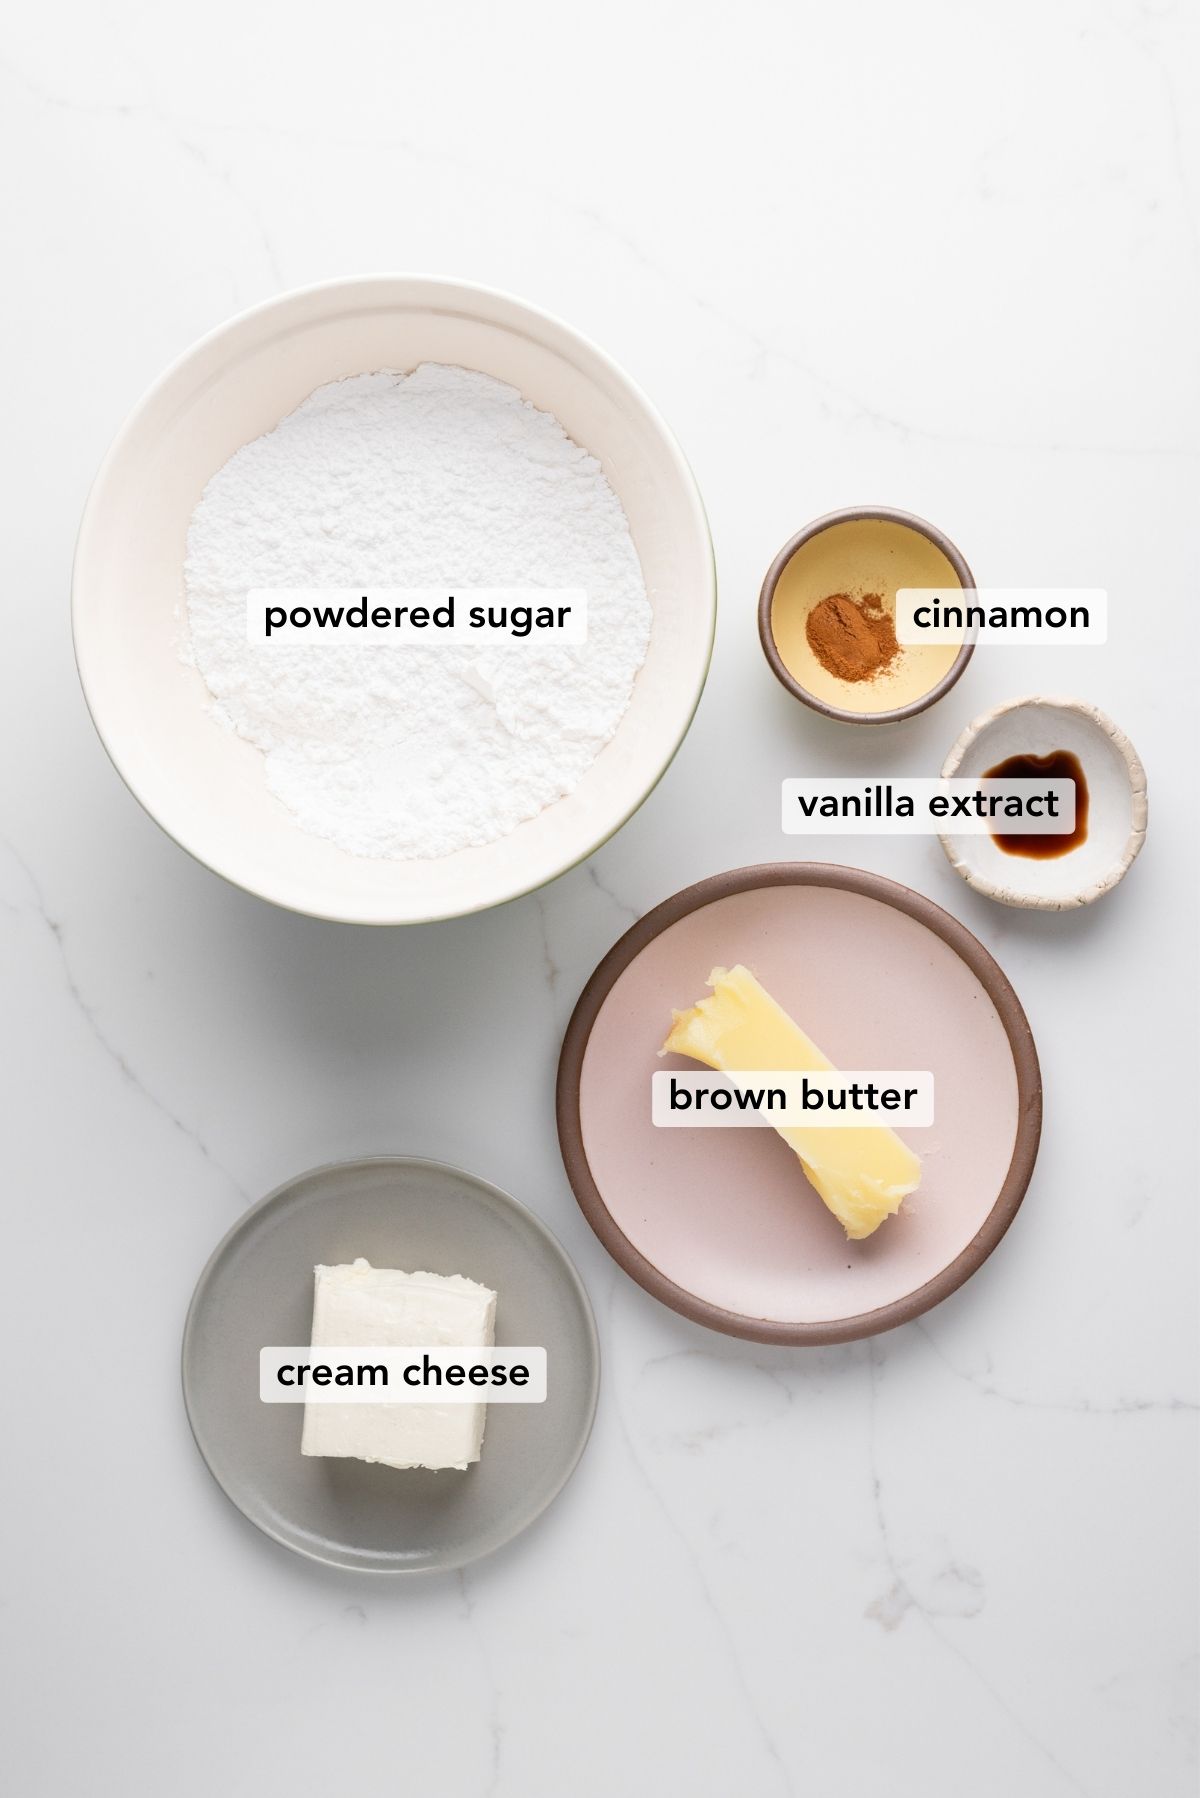 Brown butter cream cheese frosting ingredients in various size bowls labeled as powdered sugar, cinnamon, vanilla extract, brown butter, and cream cheese on a white marbled background.